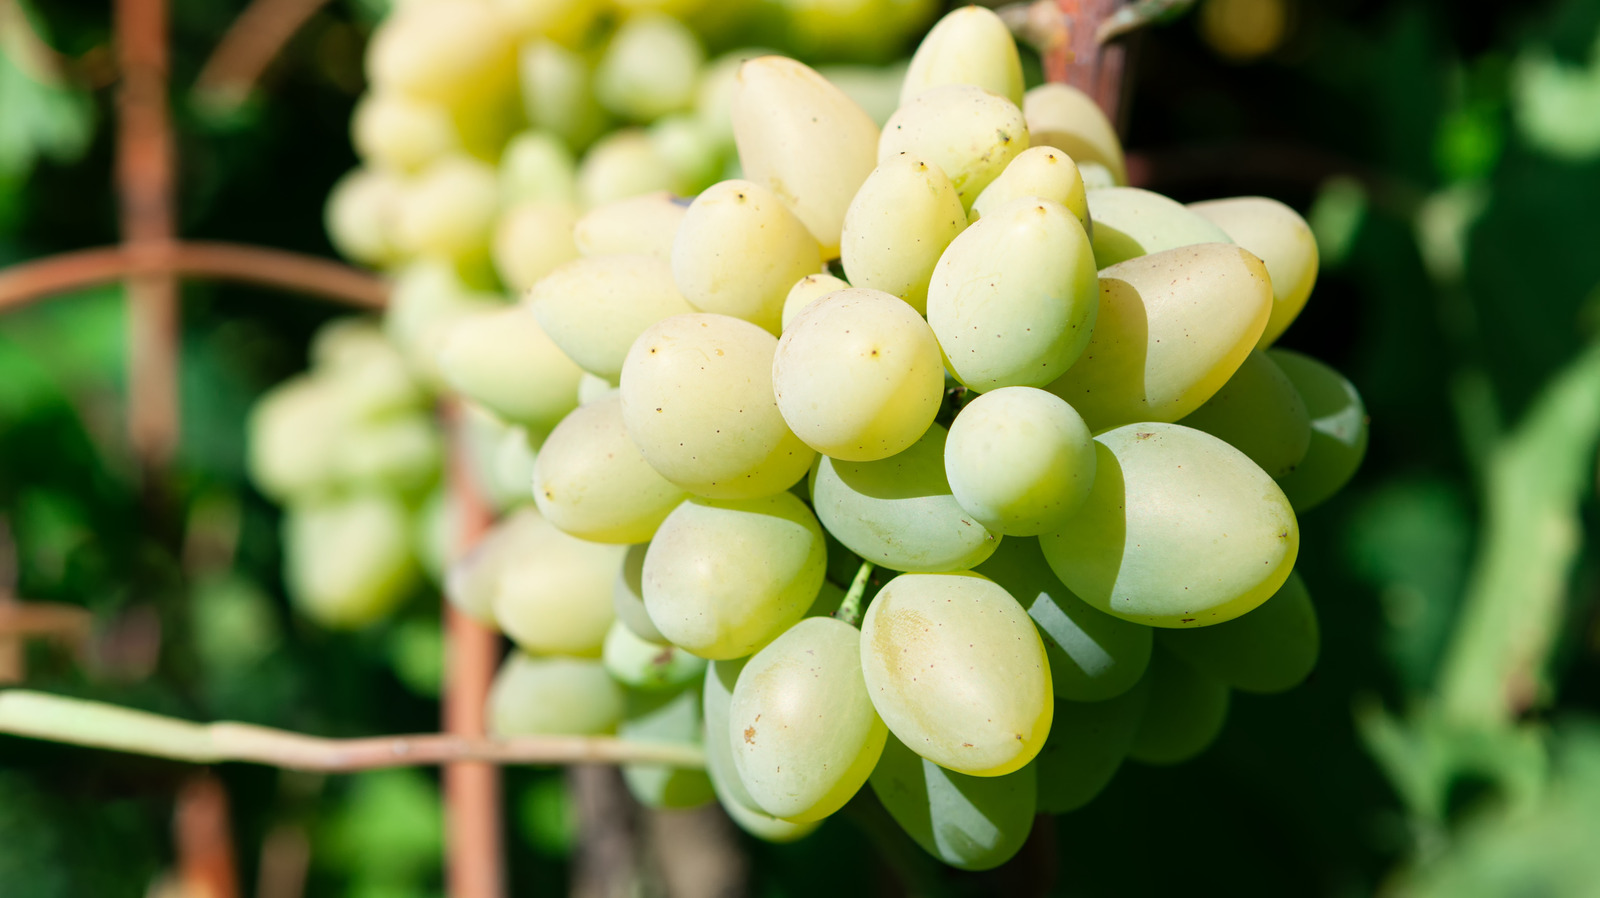 Organic red & green grapes are on sale right now for $2.49 per lb